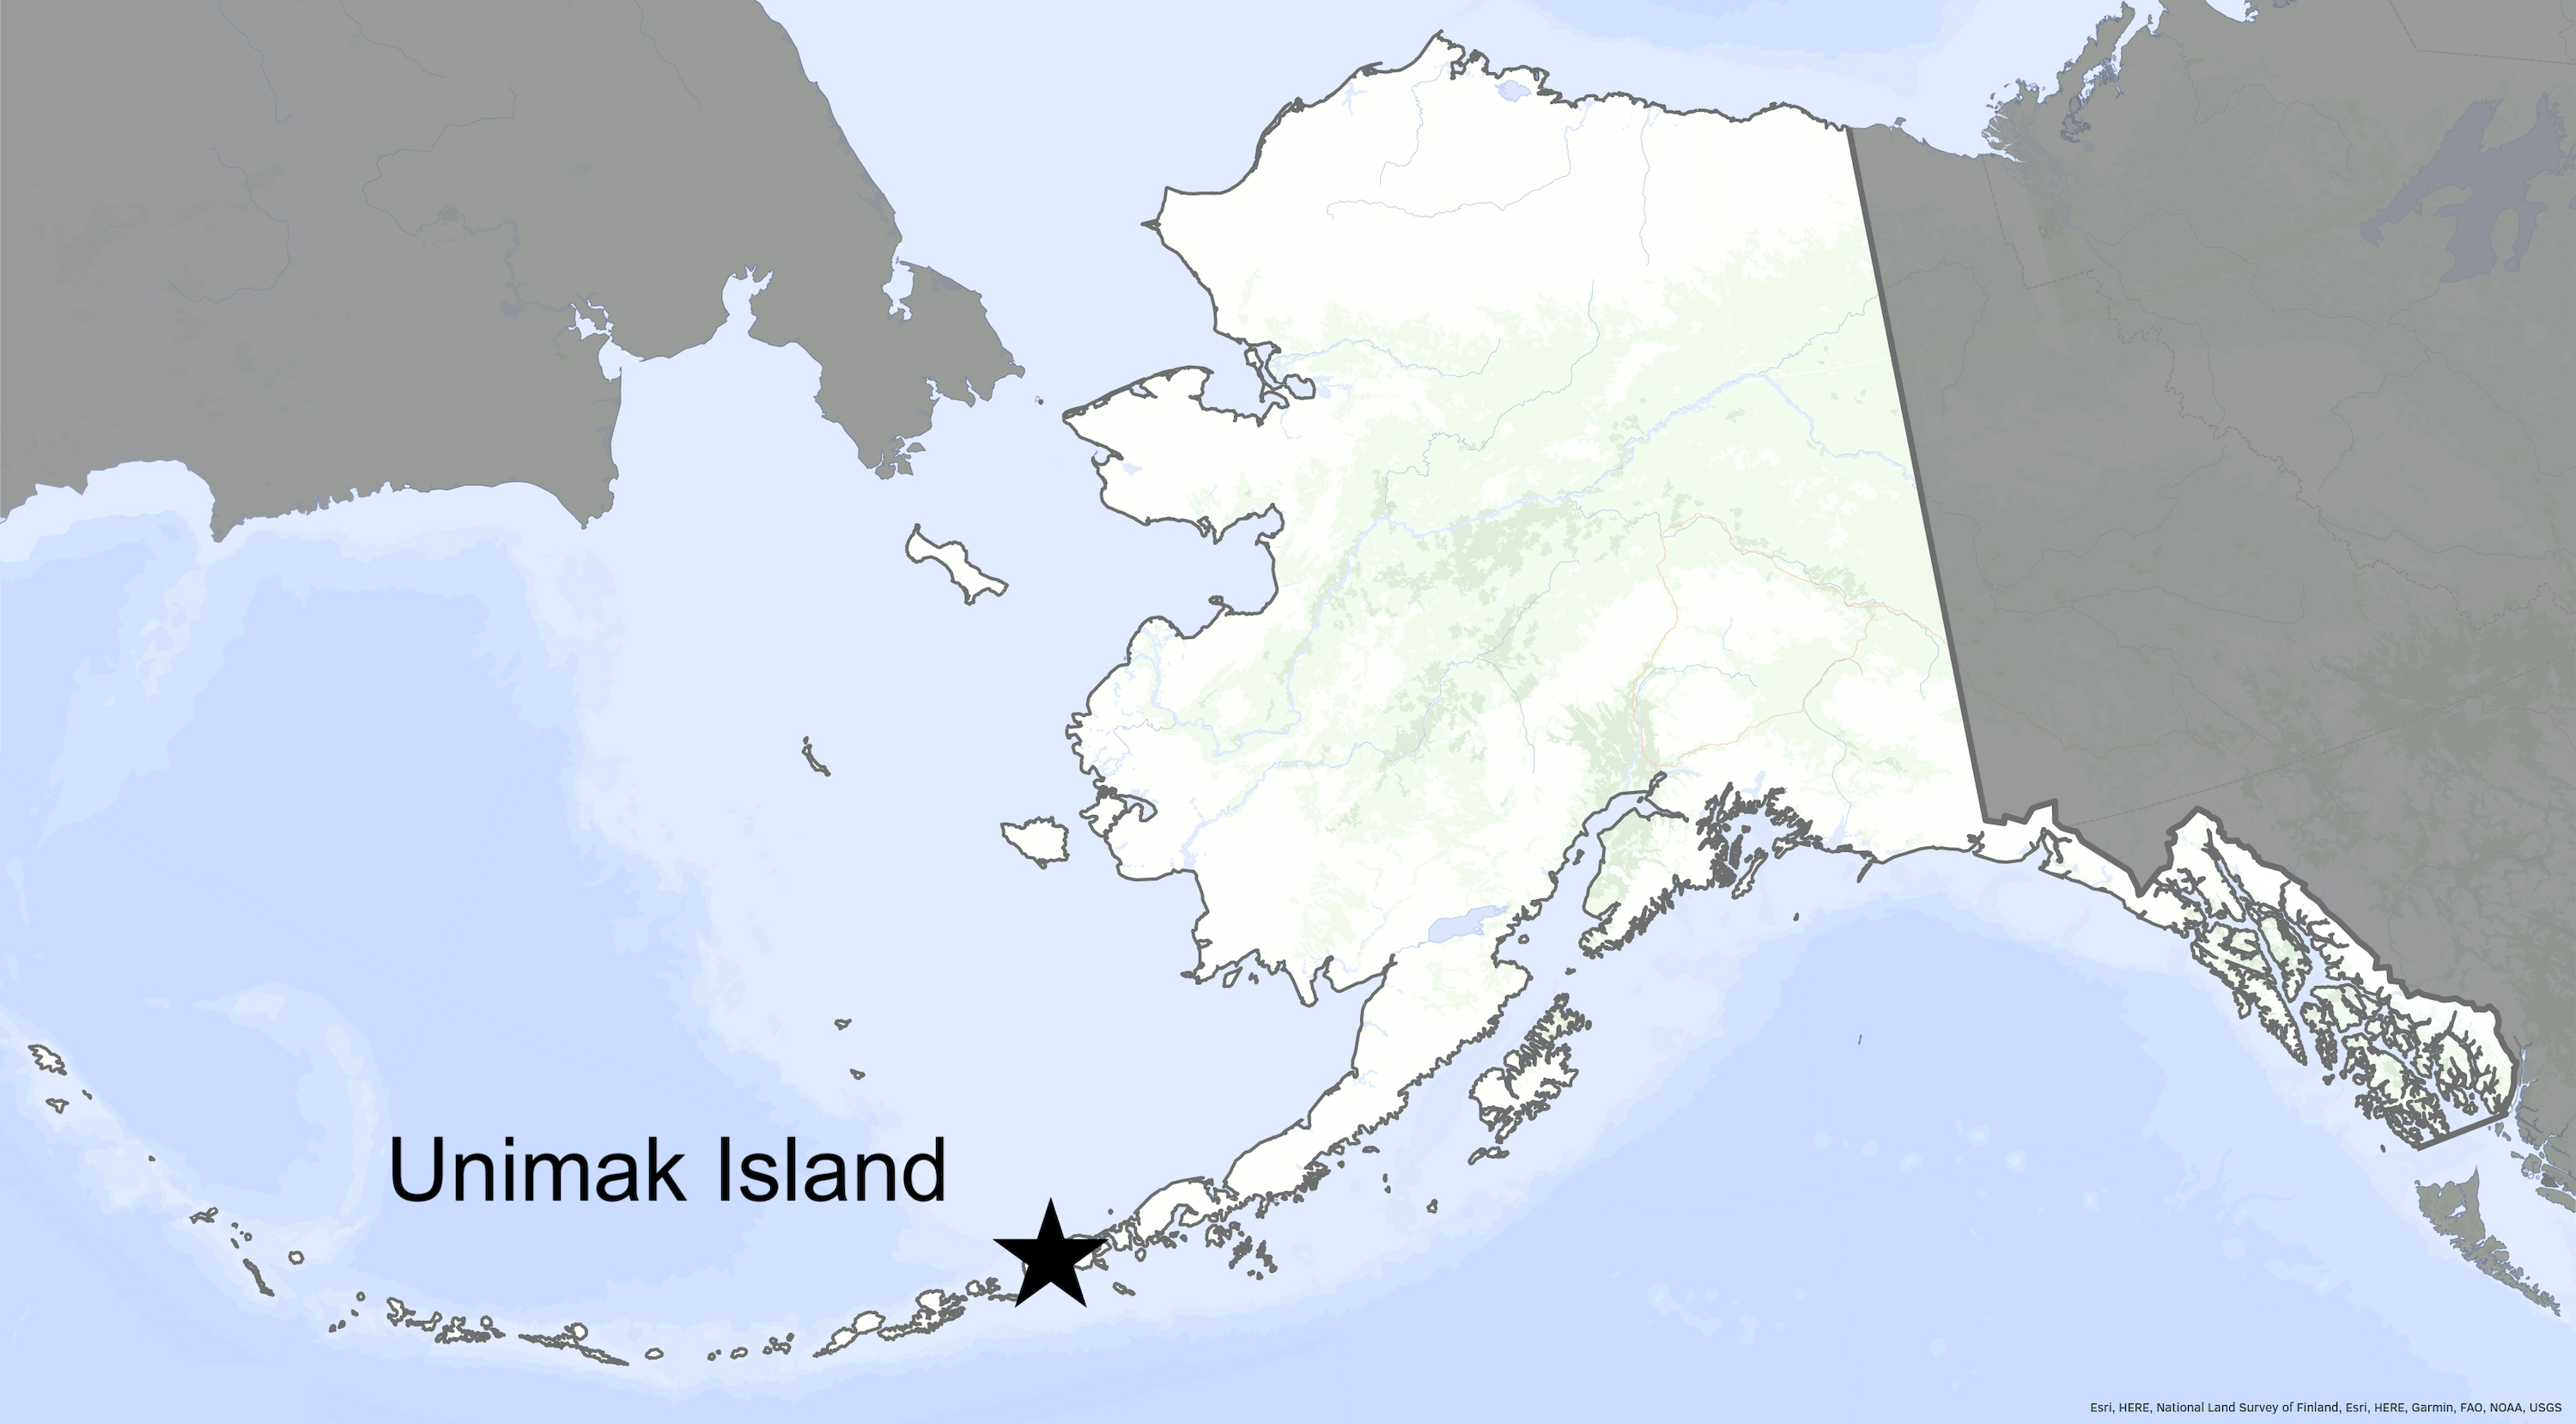 A map of Alaska shows the location of Unimak Island in the Aleutian Island chain.